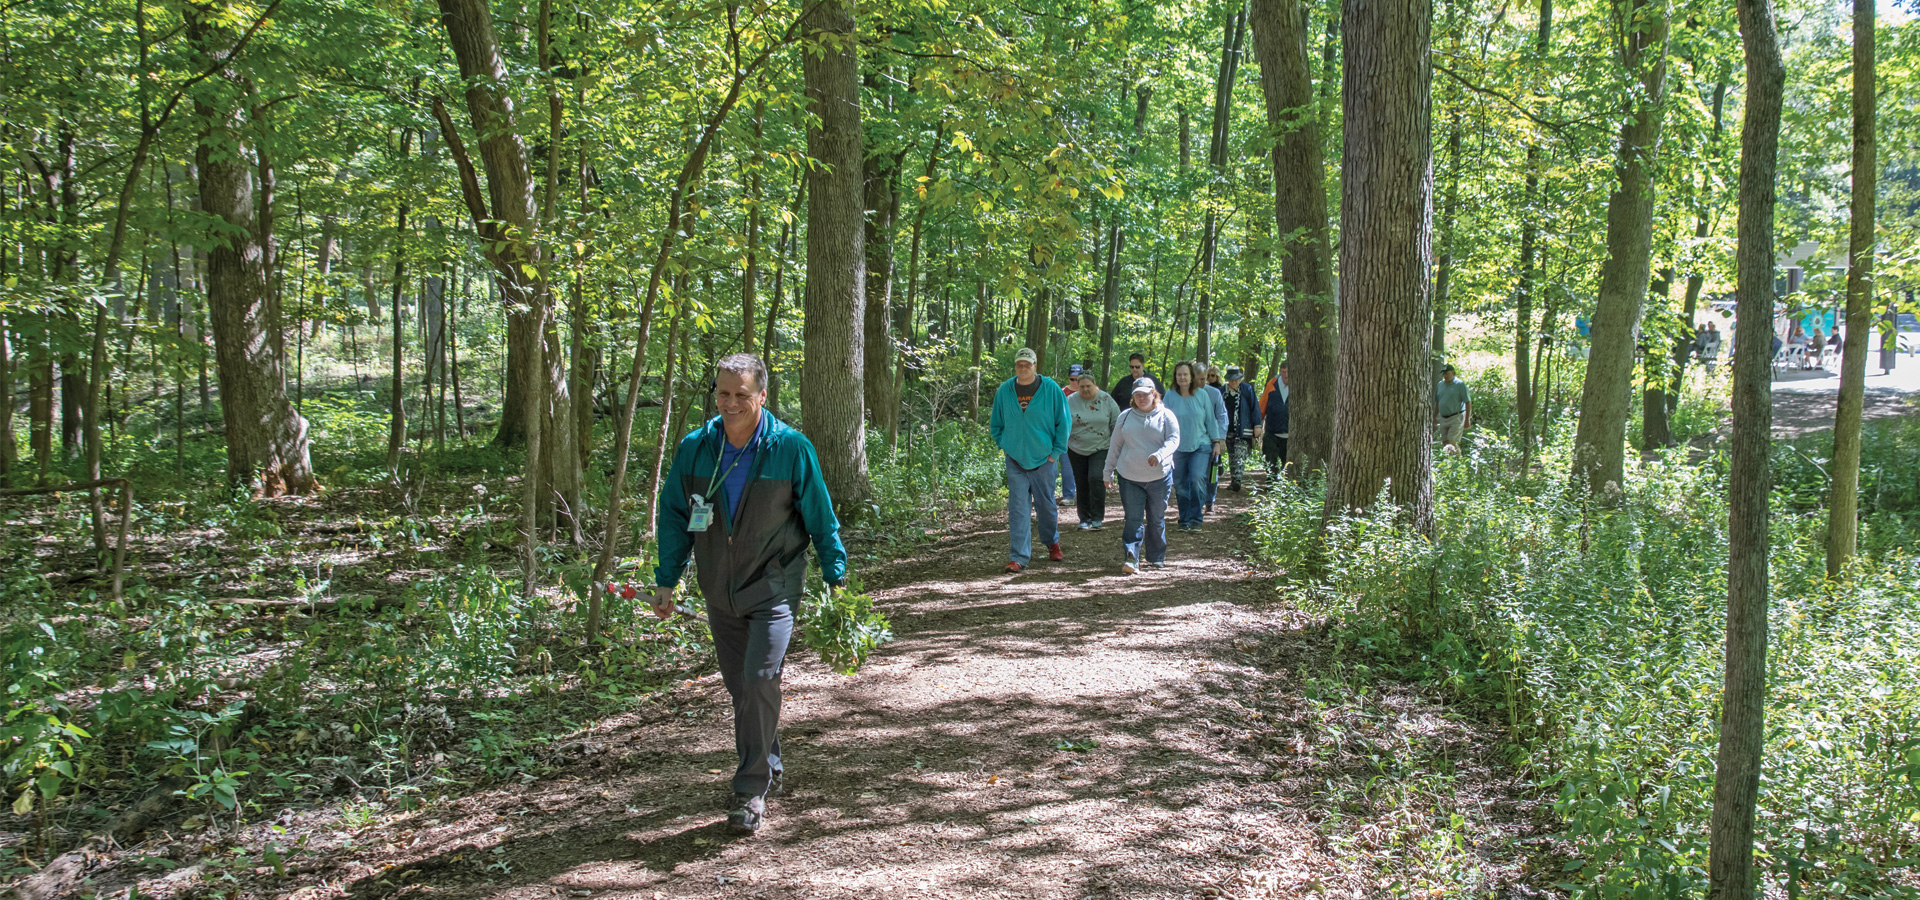 An education class hikes in the woods